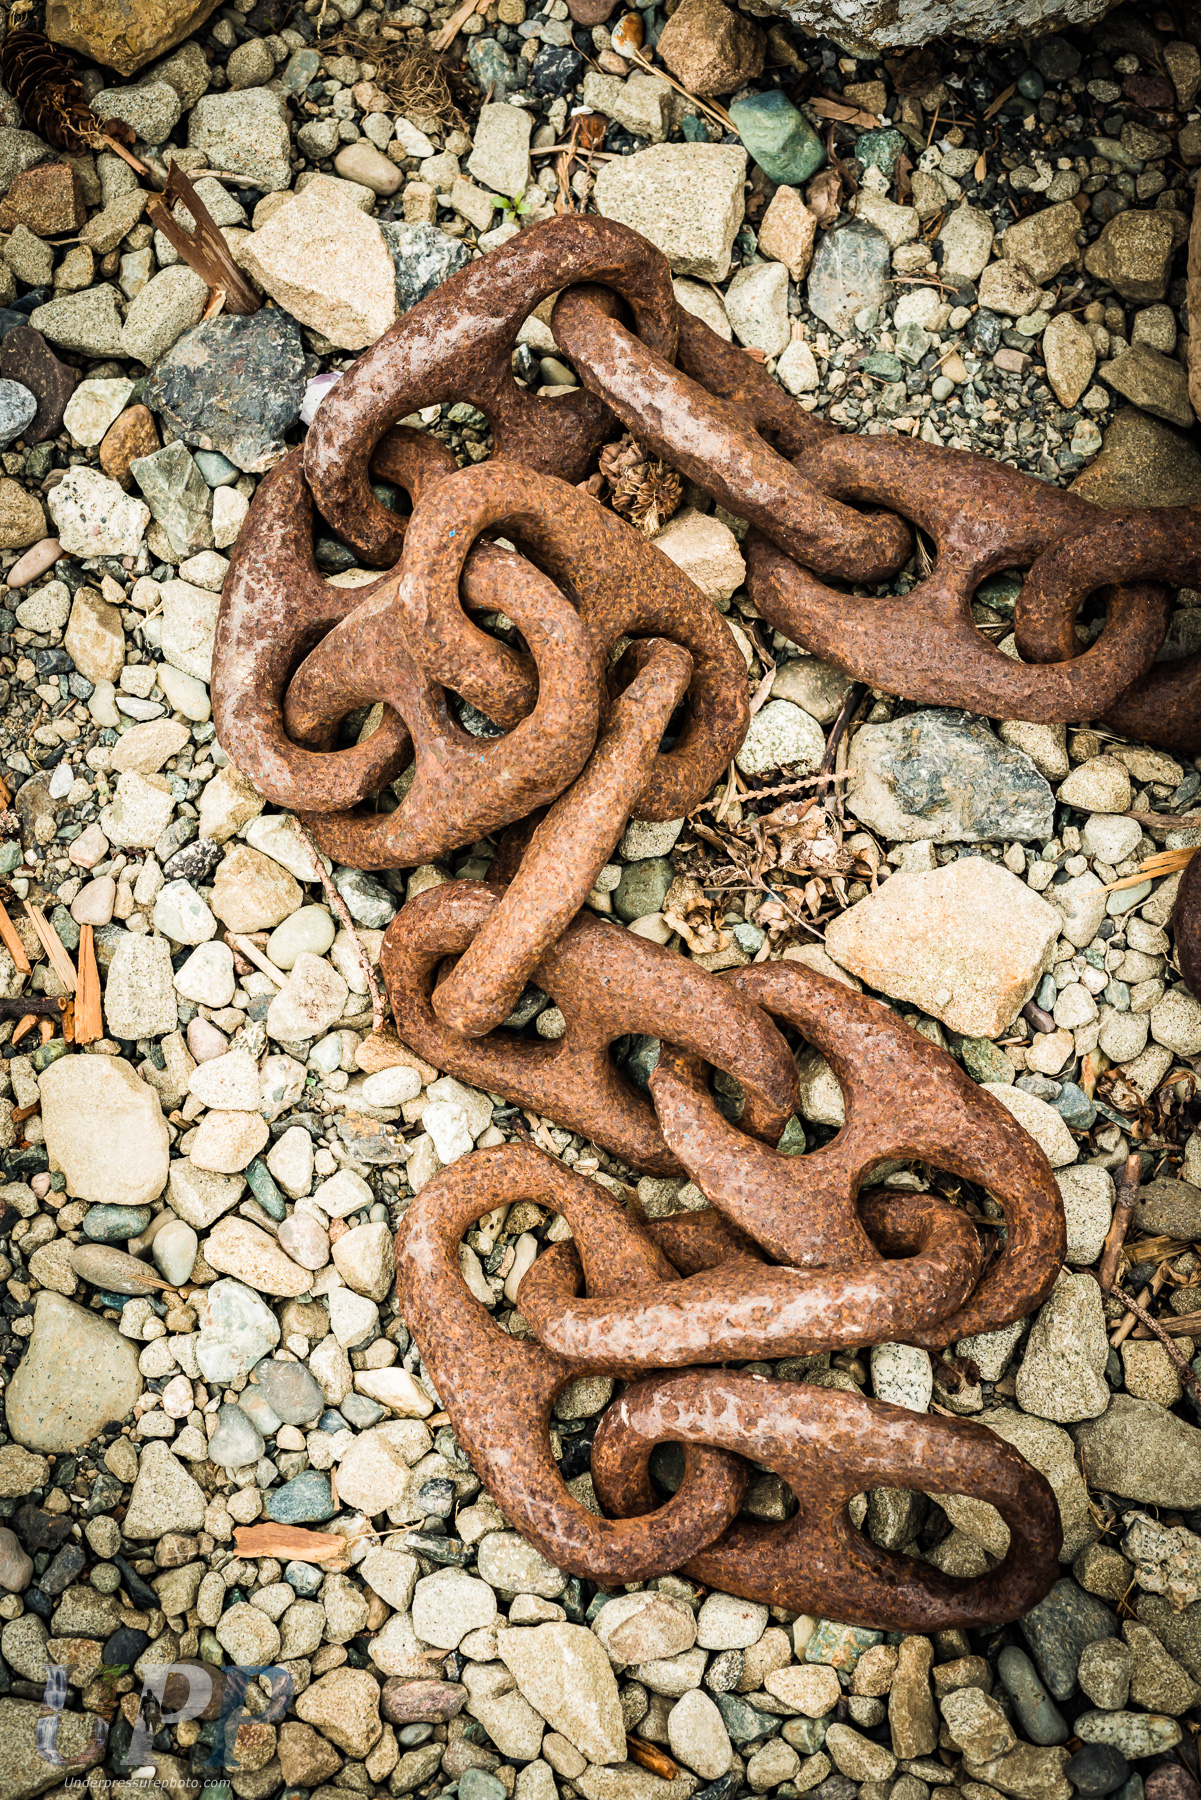 Rusting chains in Fossil Bay